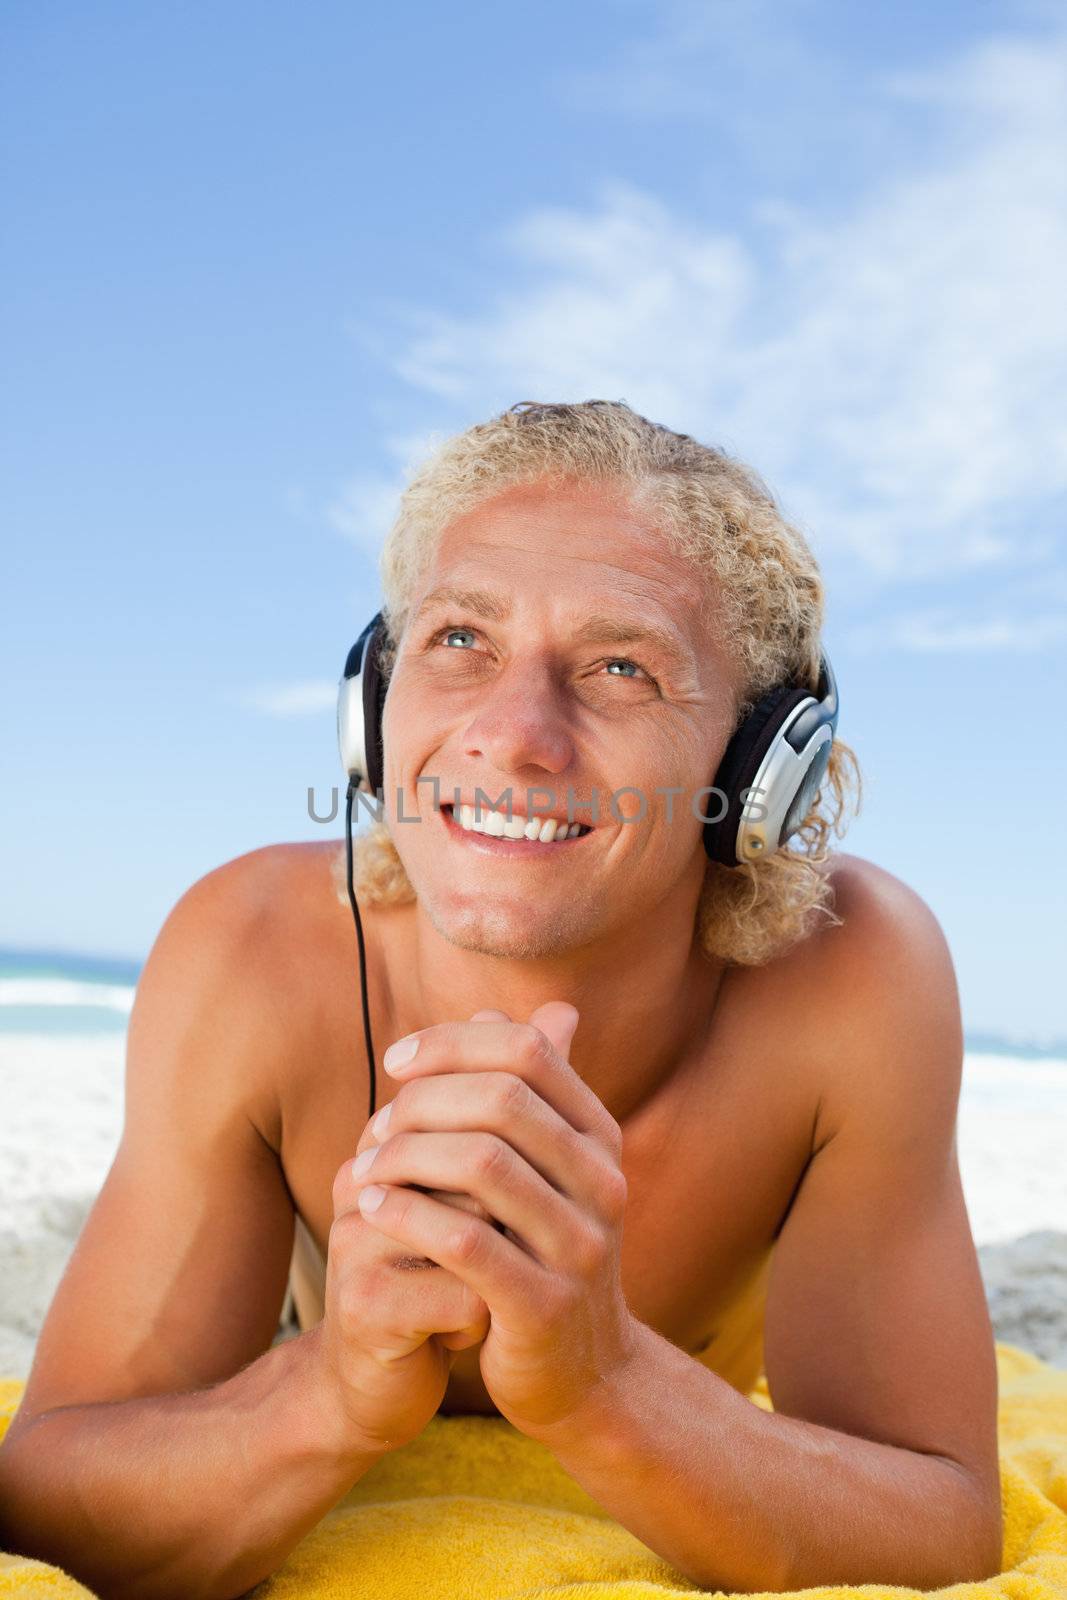 Smiling man looking up while listening to music with his headset by Wavebreakmedia